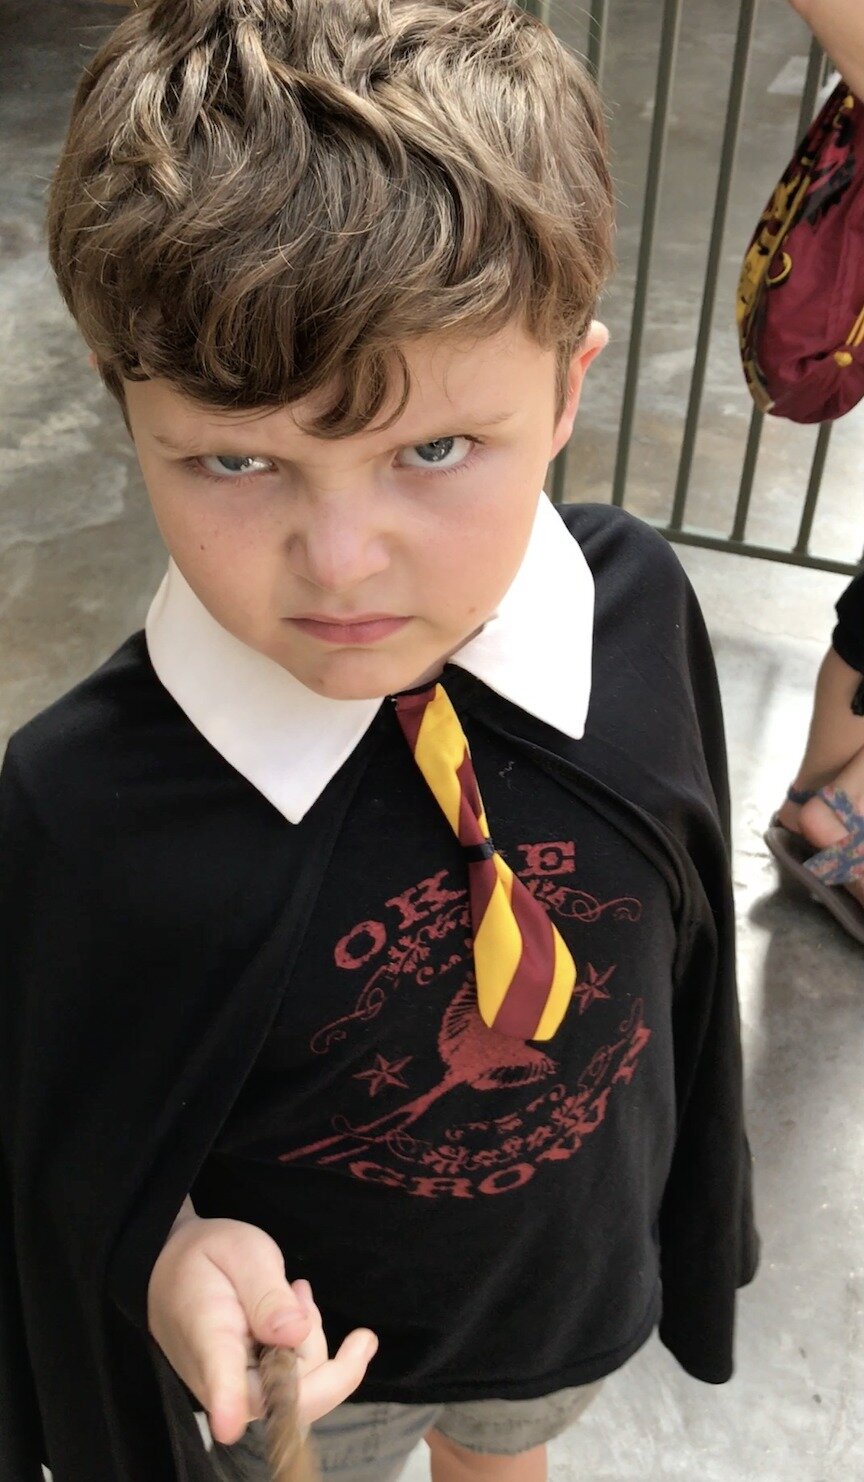 Cash's face when he finds out you didn't use a travel planner to book your theme park vacation. Now who's going to help you make sure you don't miss all the super fun things to do in the Wizarding World of Harry Potter? Tsk tsk. 

#universalstudios #